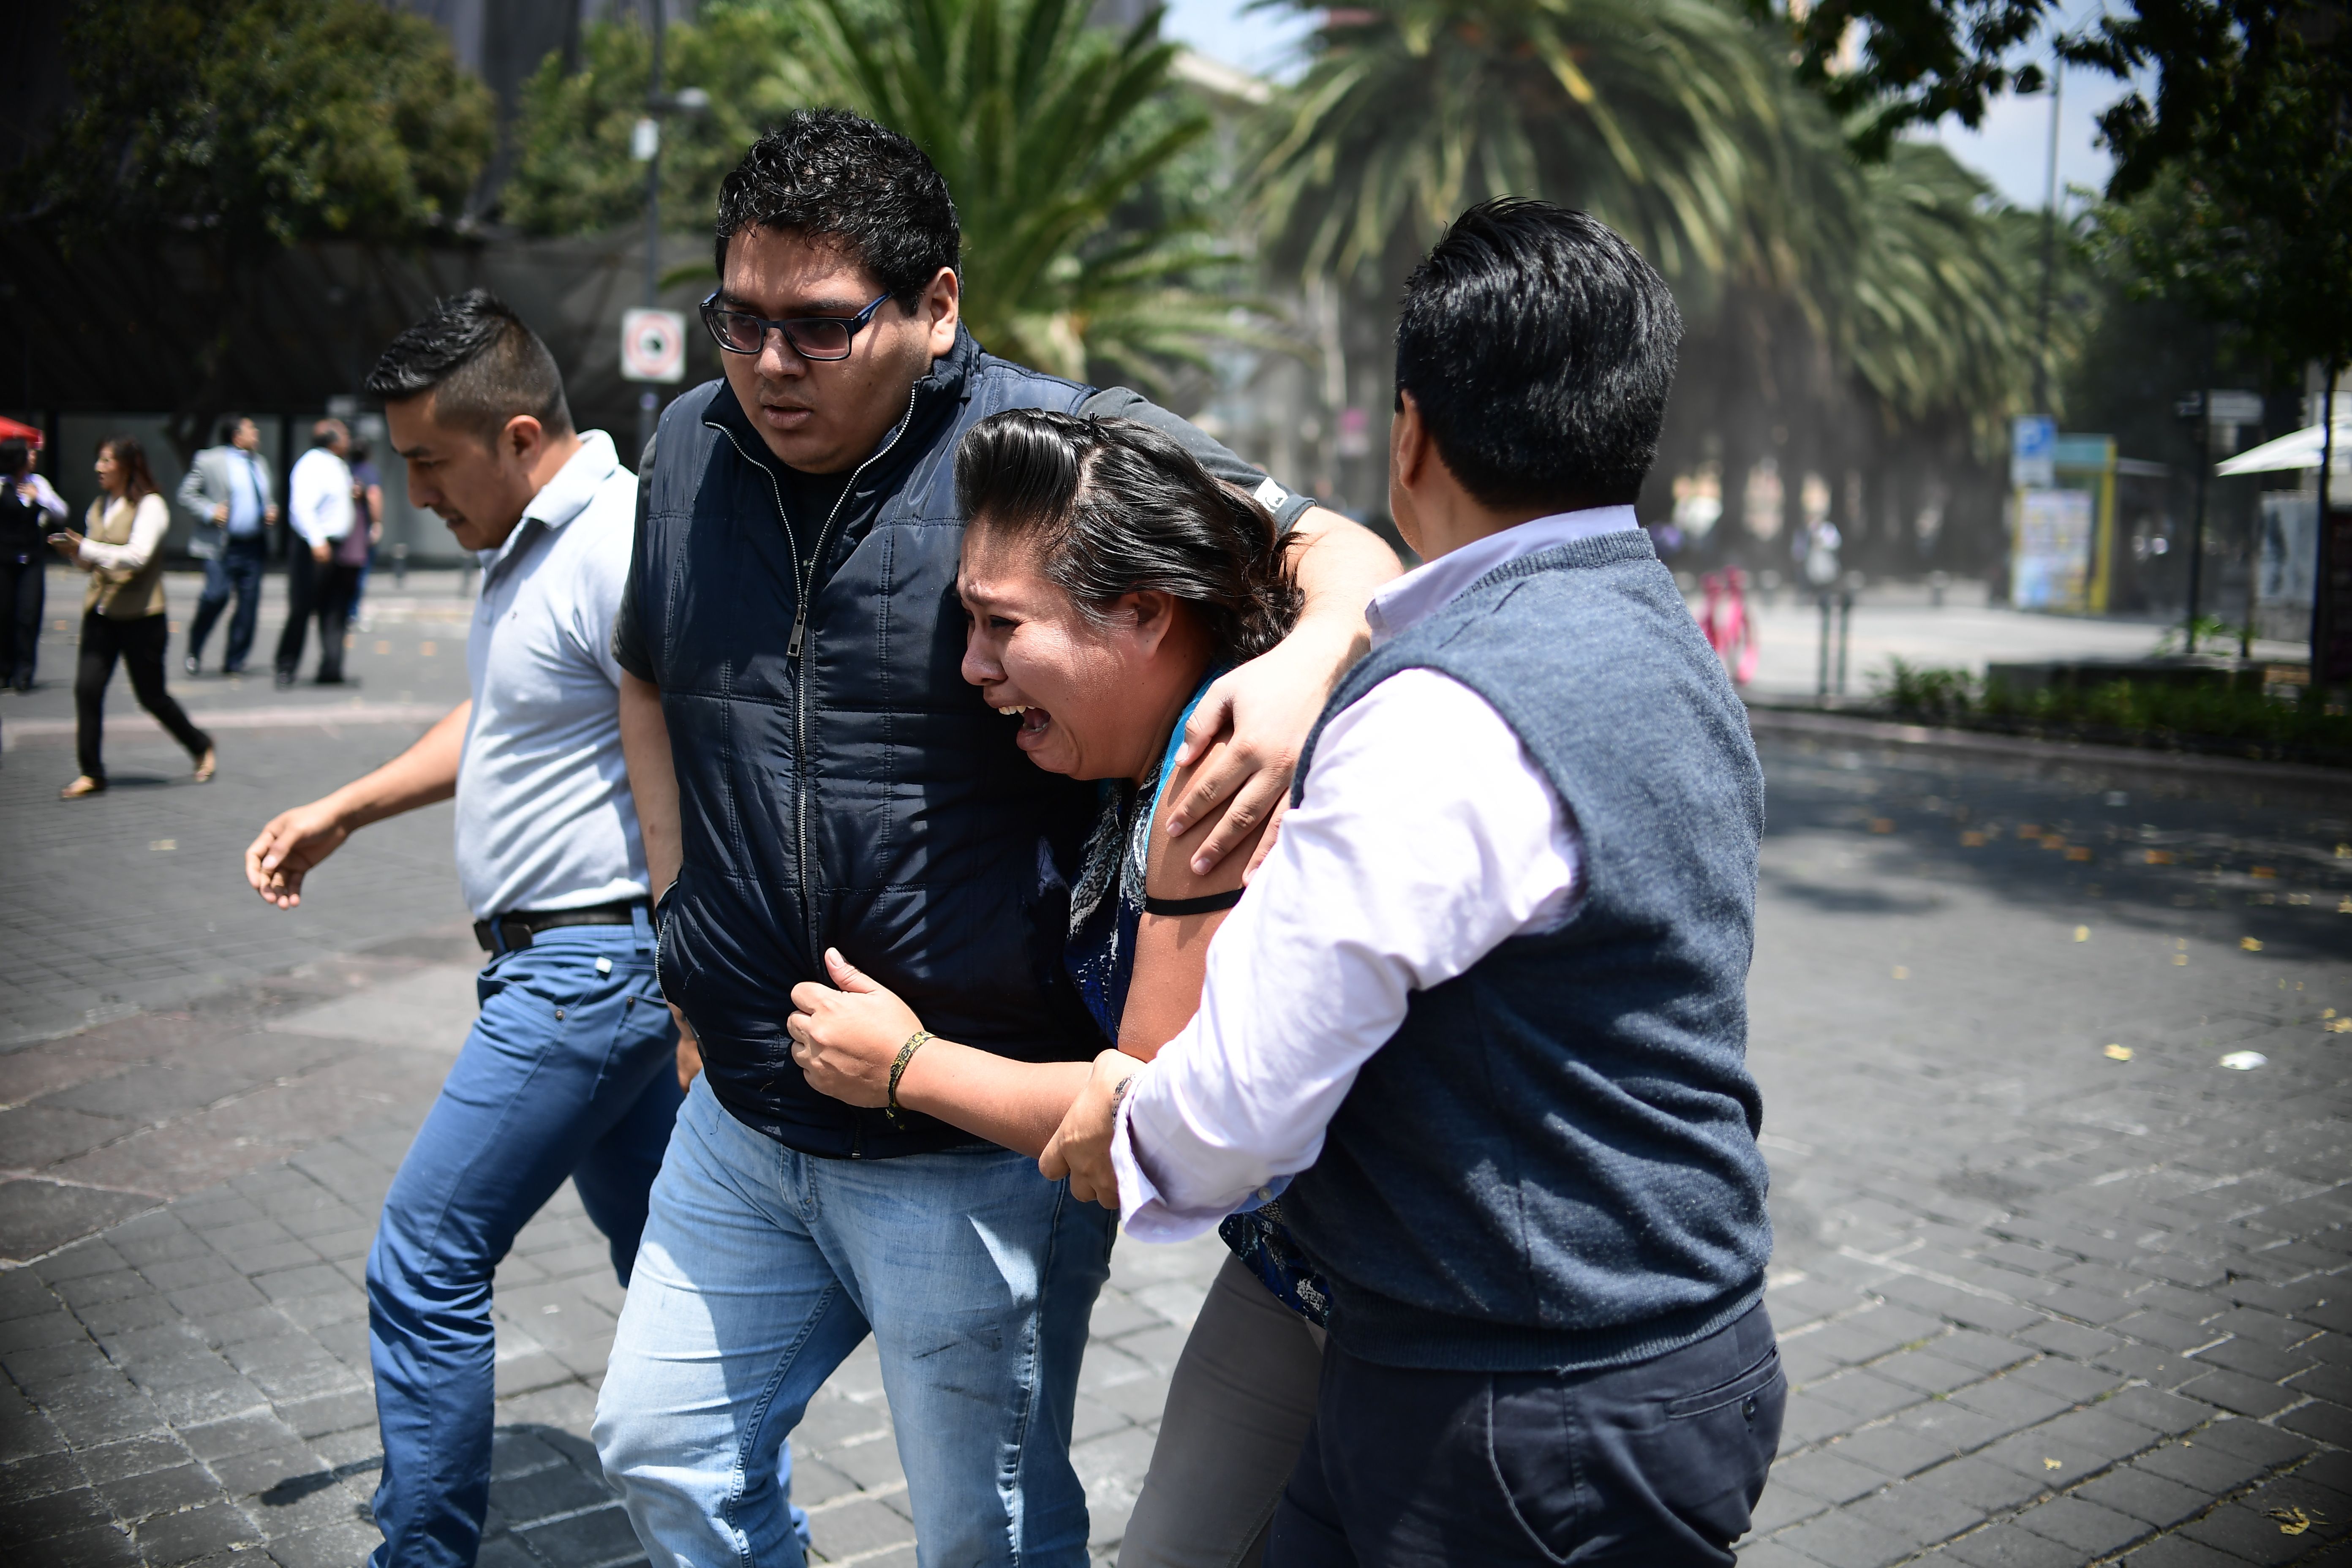 People react as a real quake rattles Mexico City on Sept. 19, 2017, as an earthquake drill was being held in the capital. (Credit: RONALDO SCHEMIDT/AFP/Getty Images)